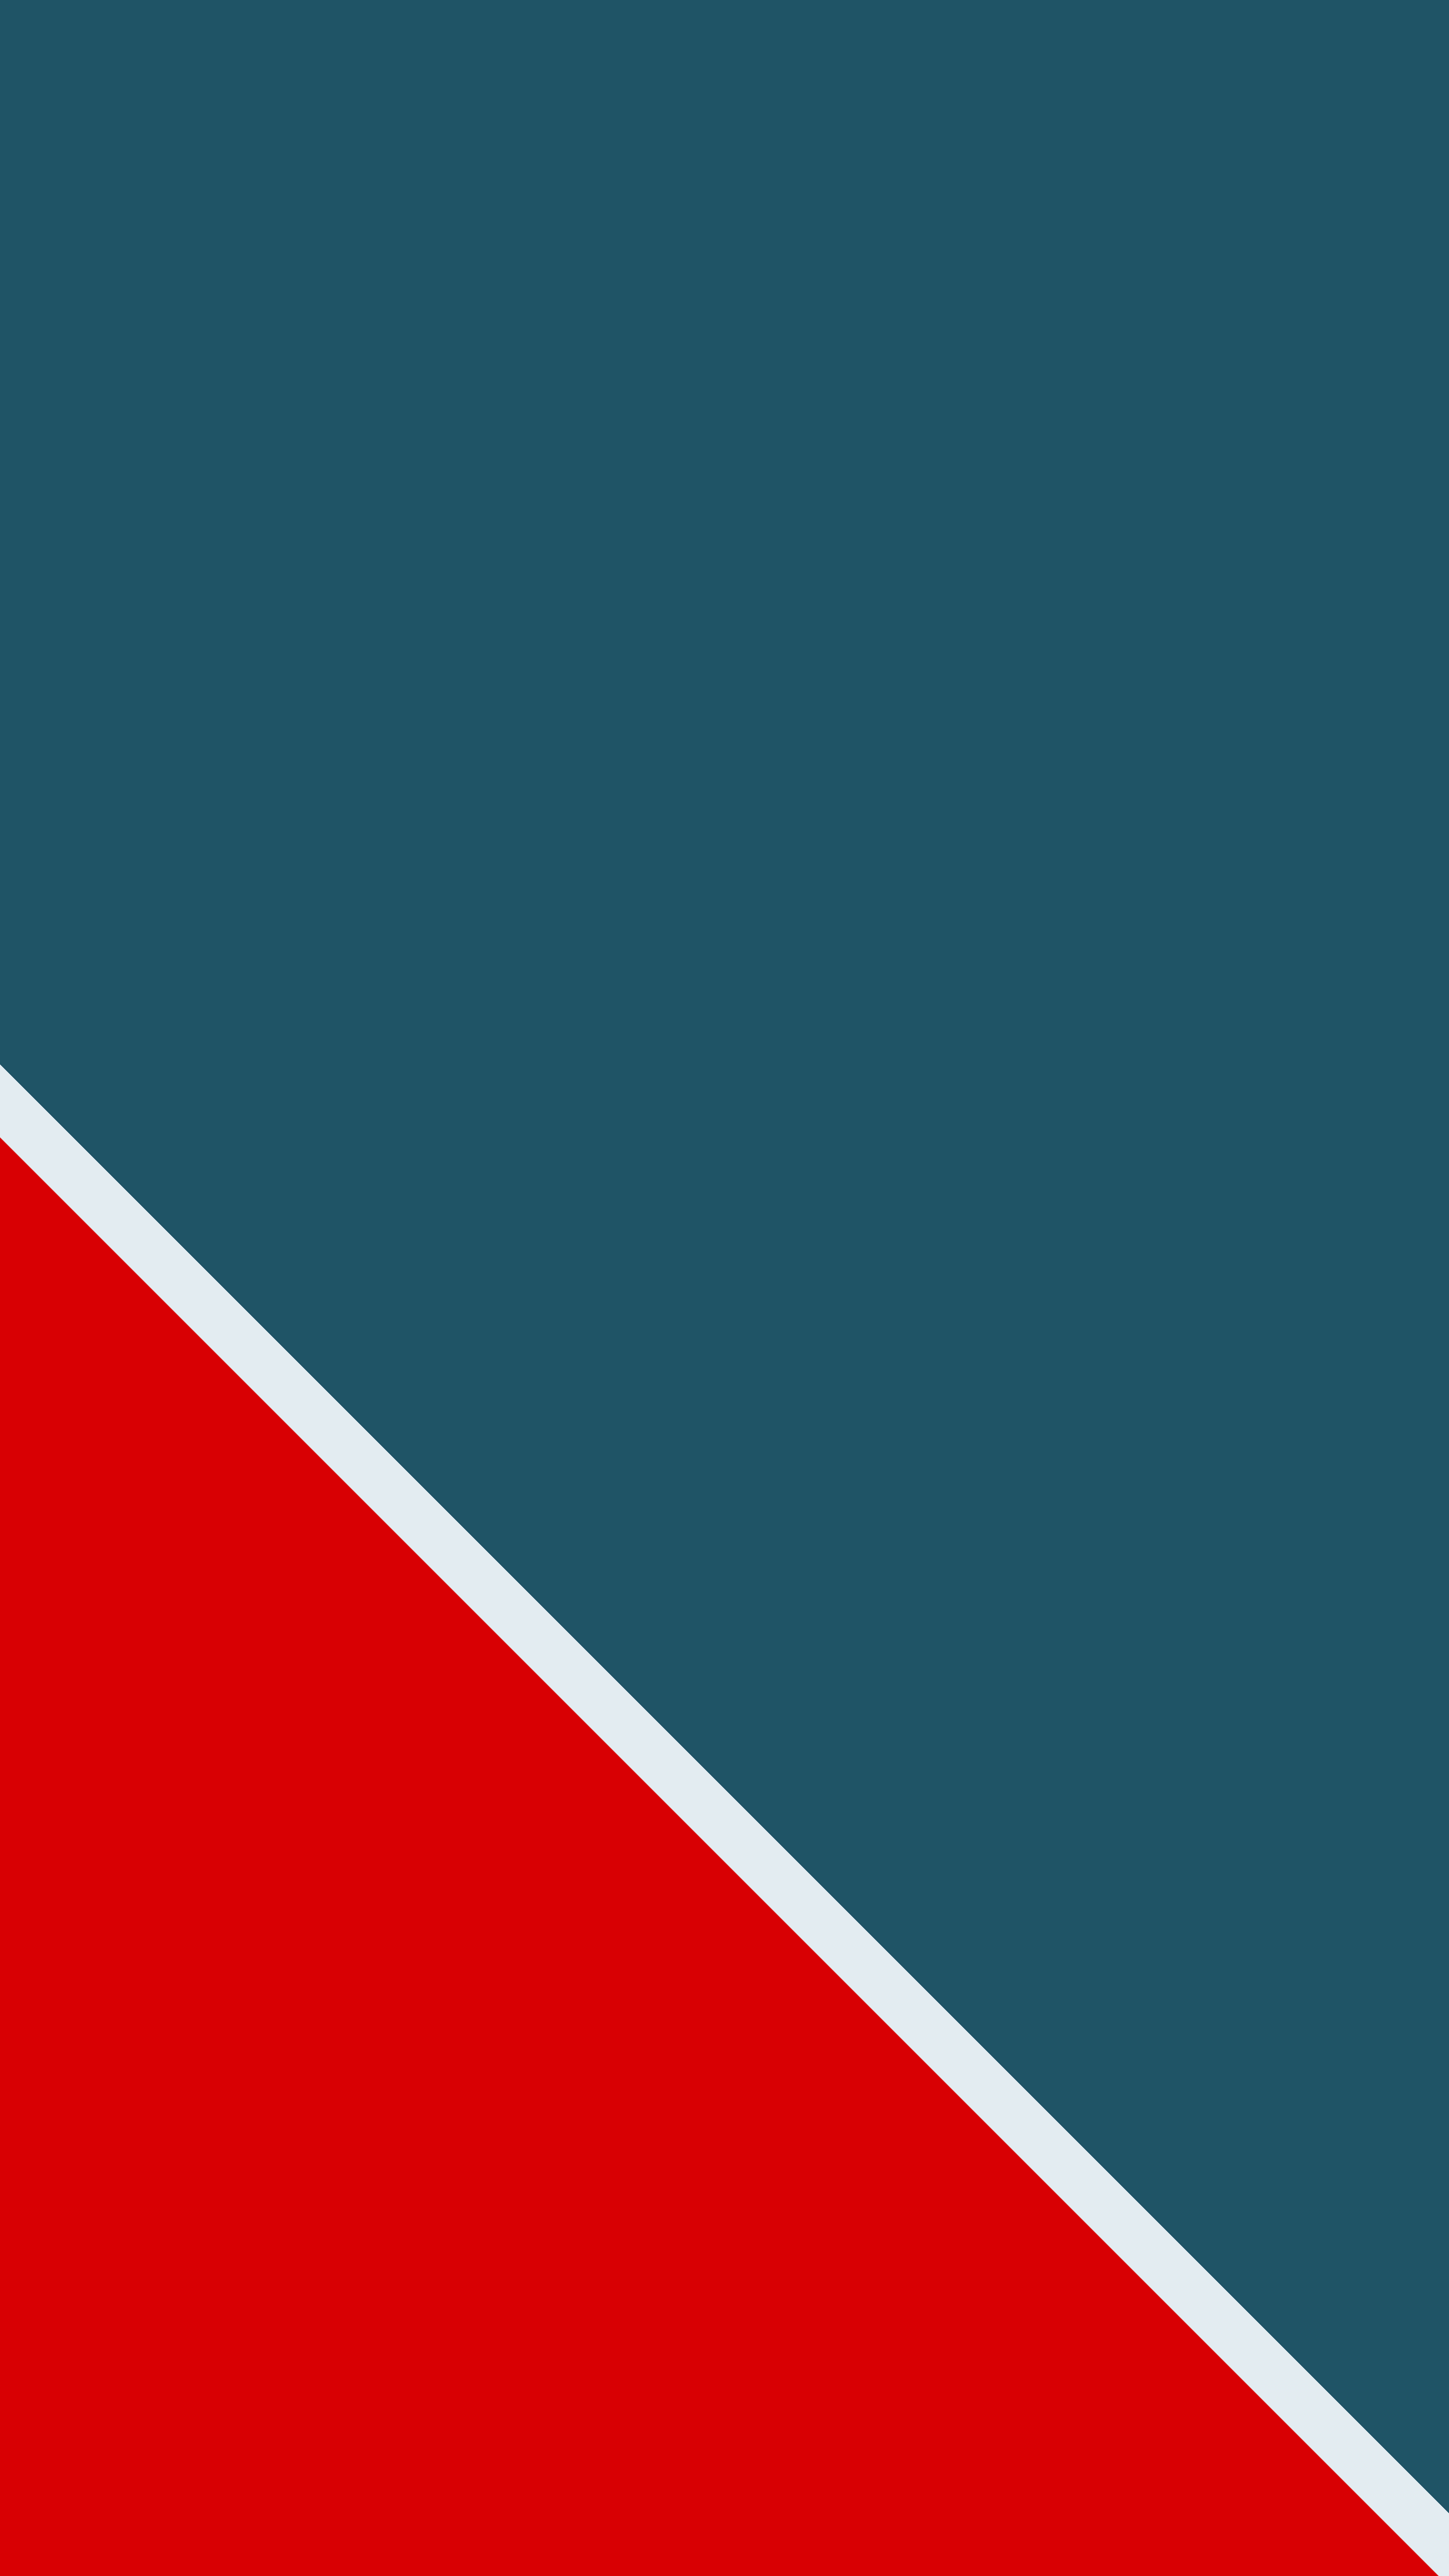 minimalism, texture, textures, blue, red, white, line